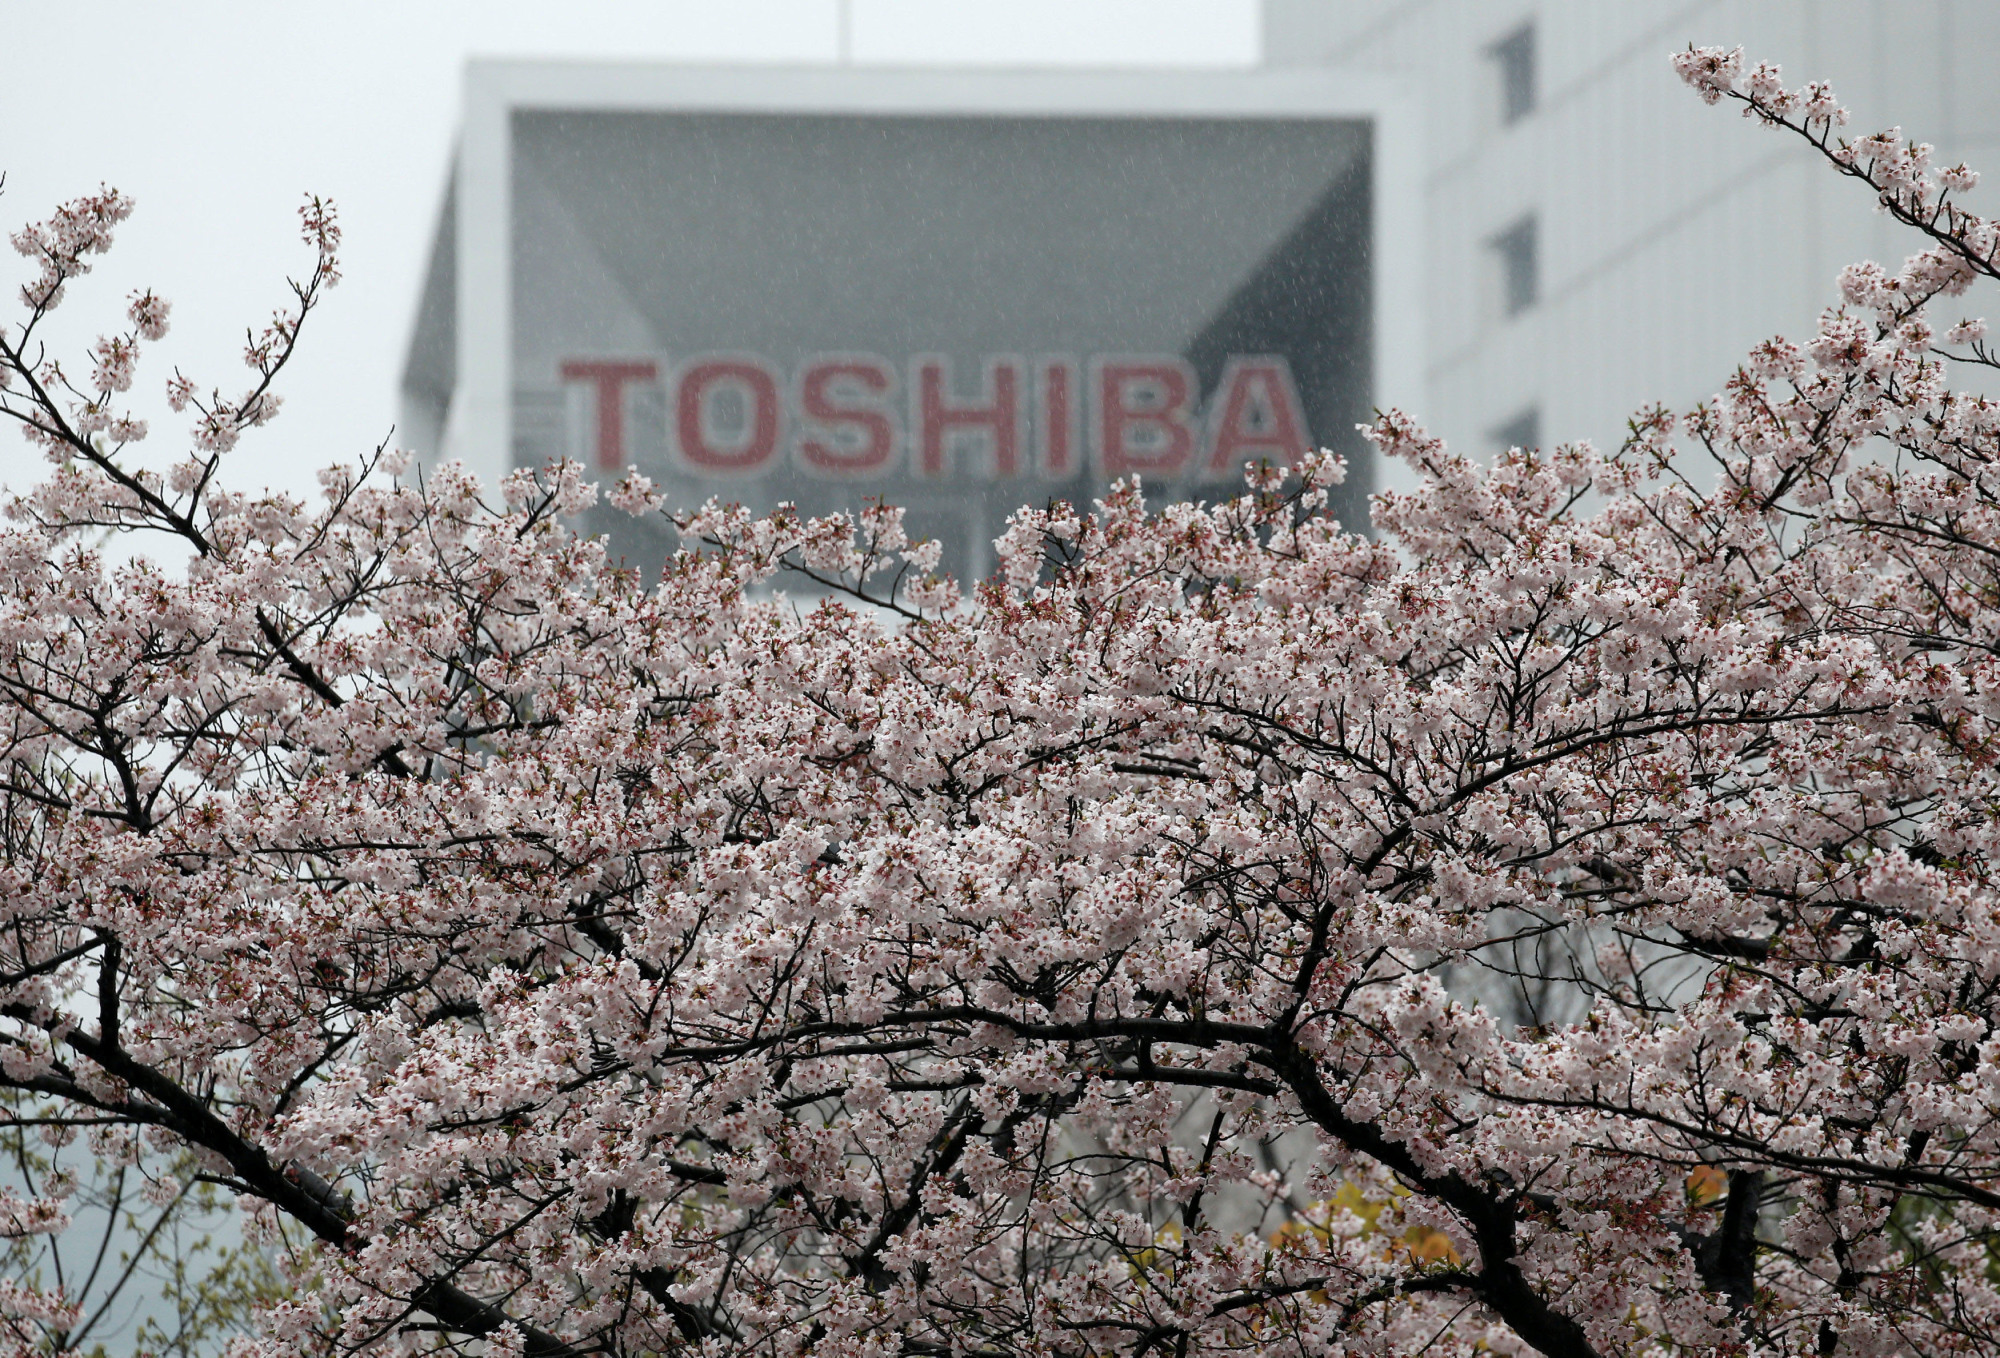 Toshiba Corp. faces possible delisting from the Tokyo Stock Exchange. | REUTERS